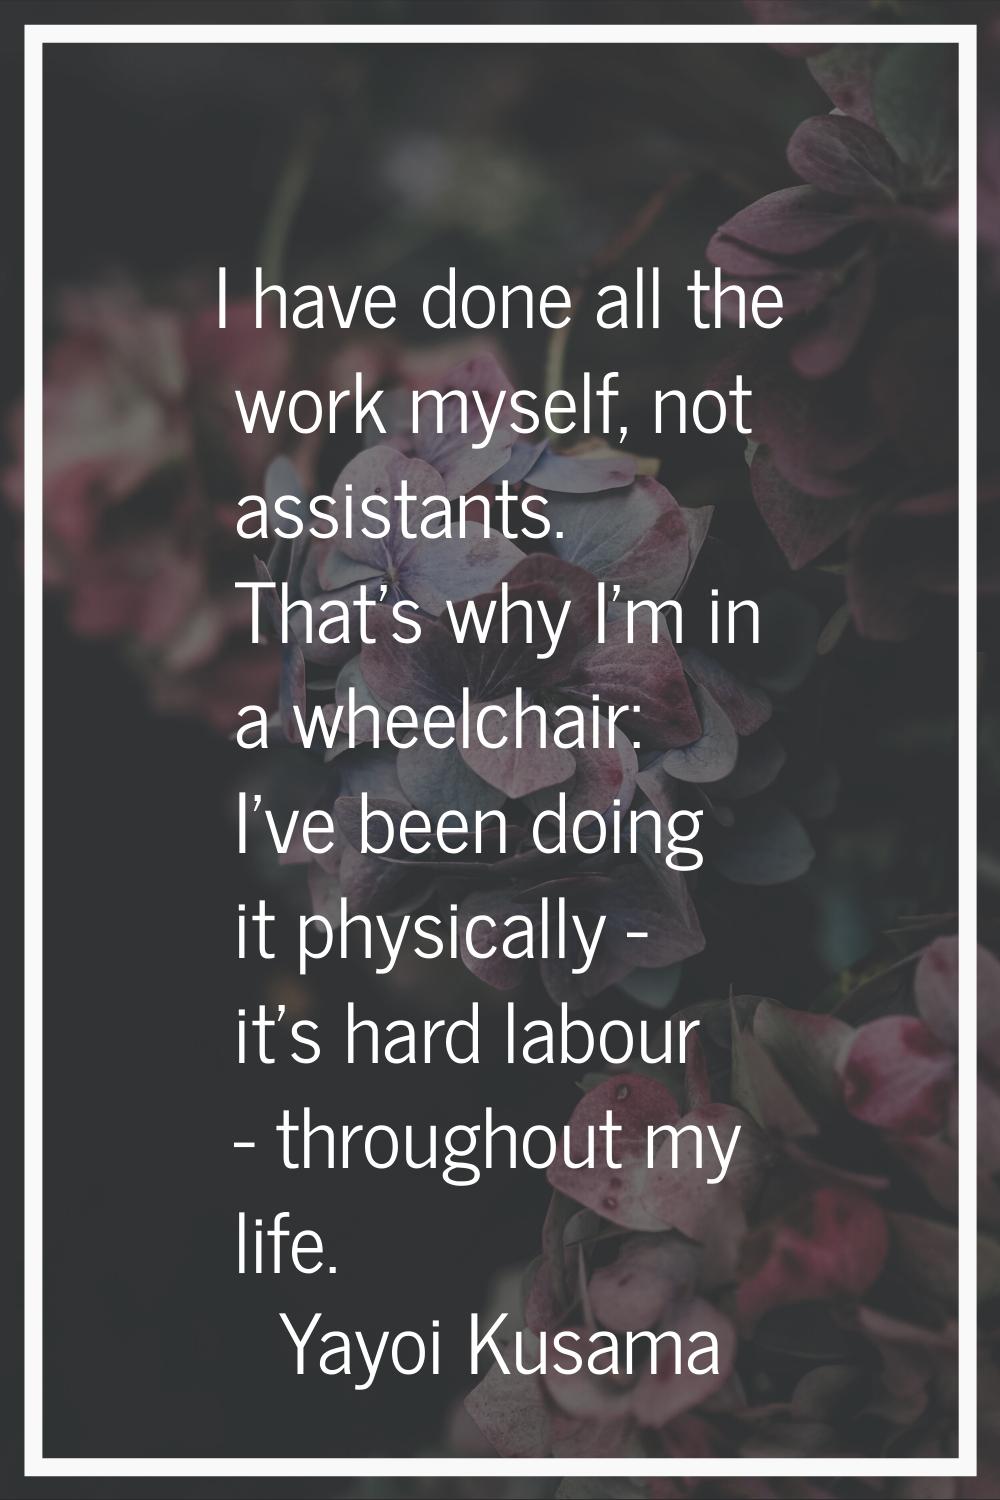 I have done all the work myself, not assistants. That's why I'm in a wheelchair: I've been doing it